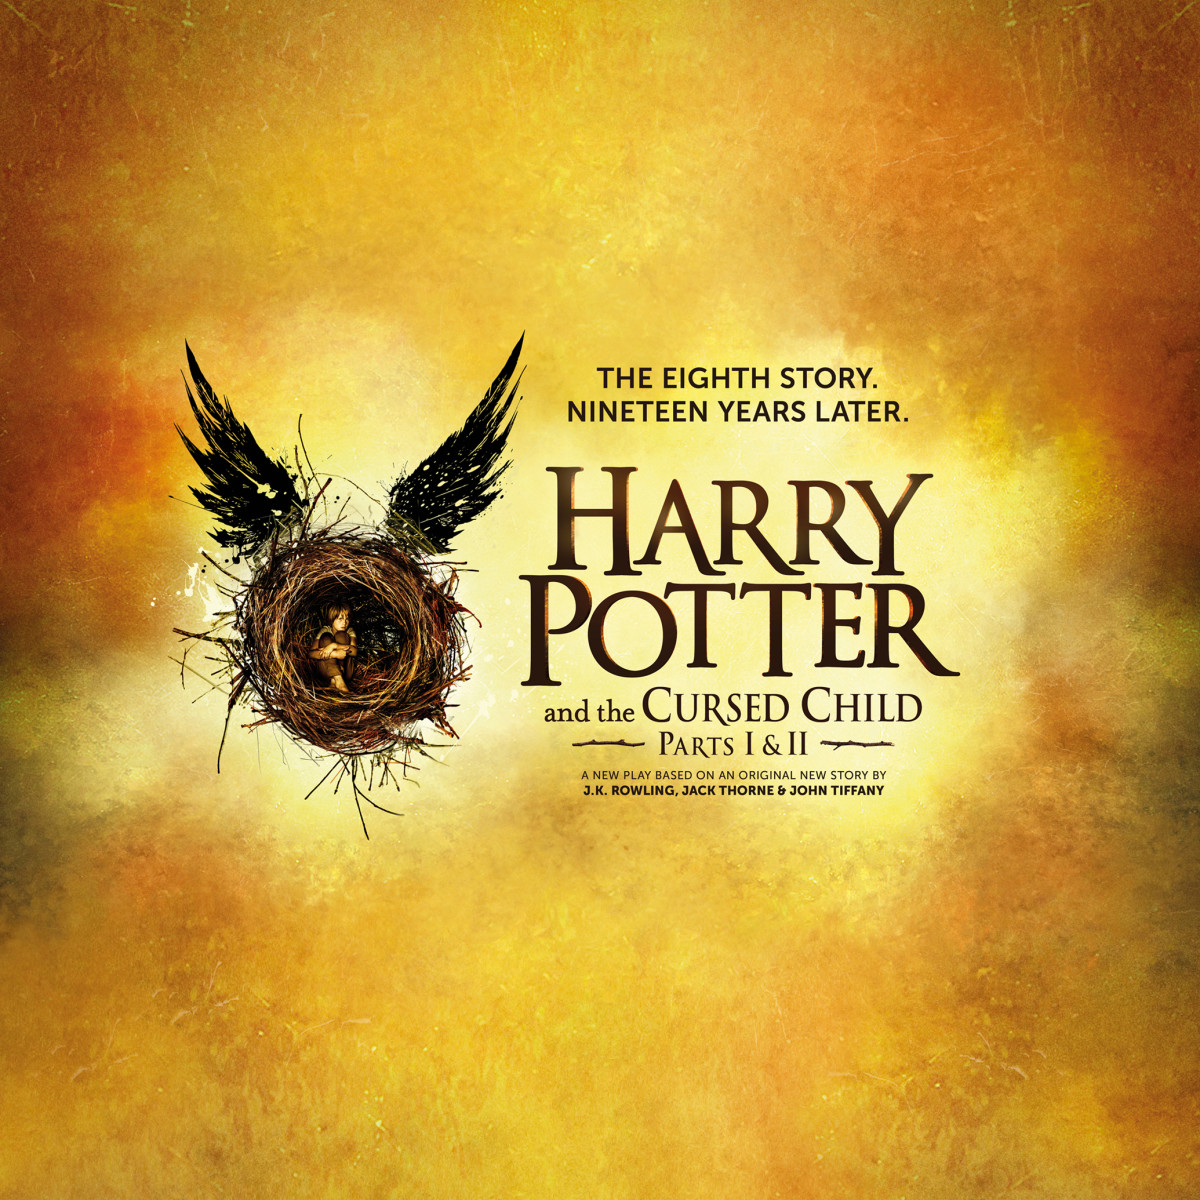 Albums 91+ Images harry potter and the cursed child images Latest